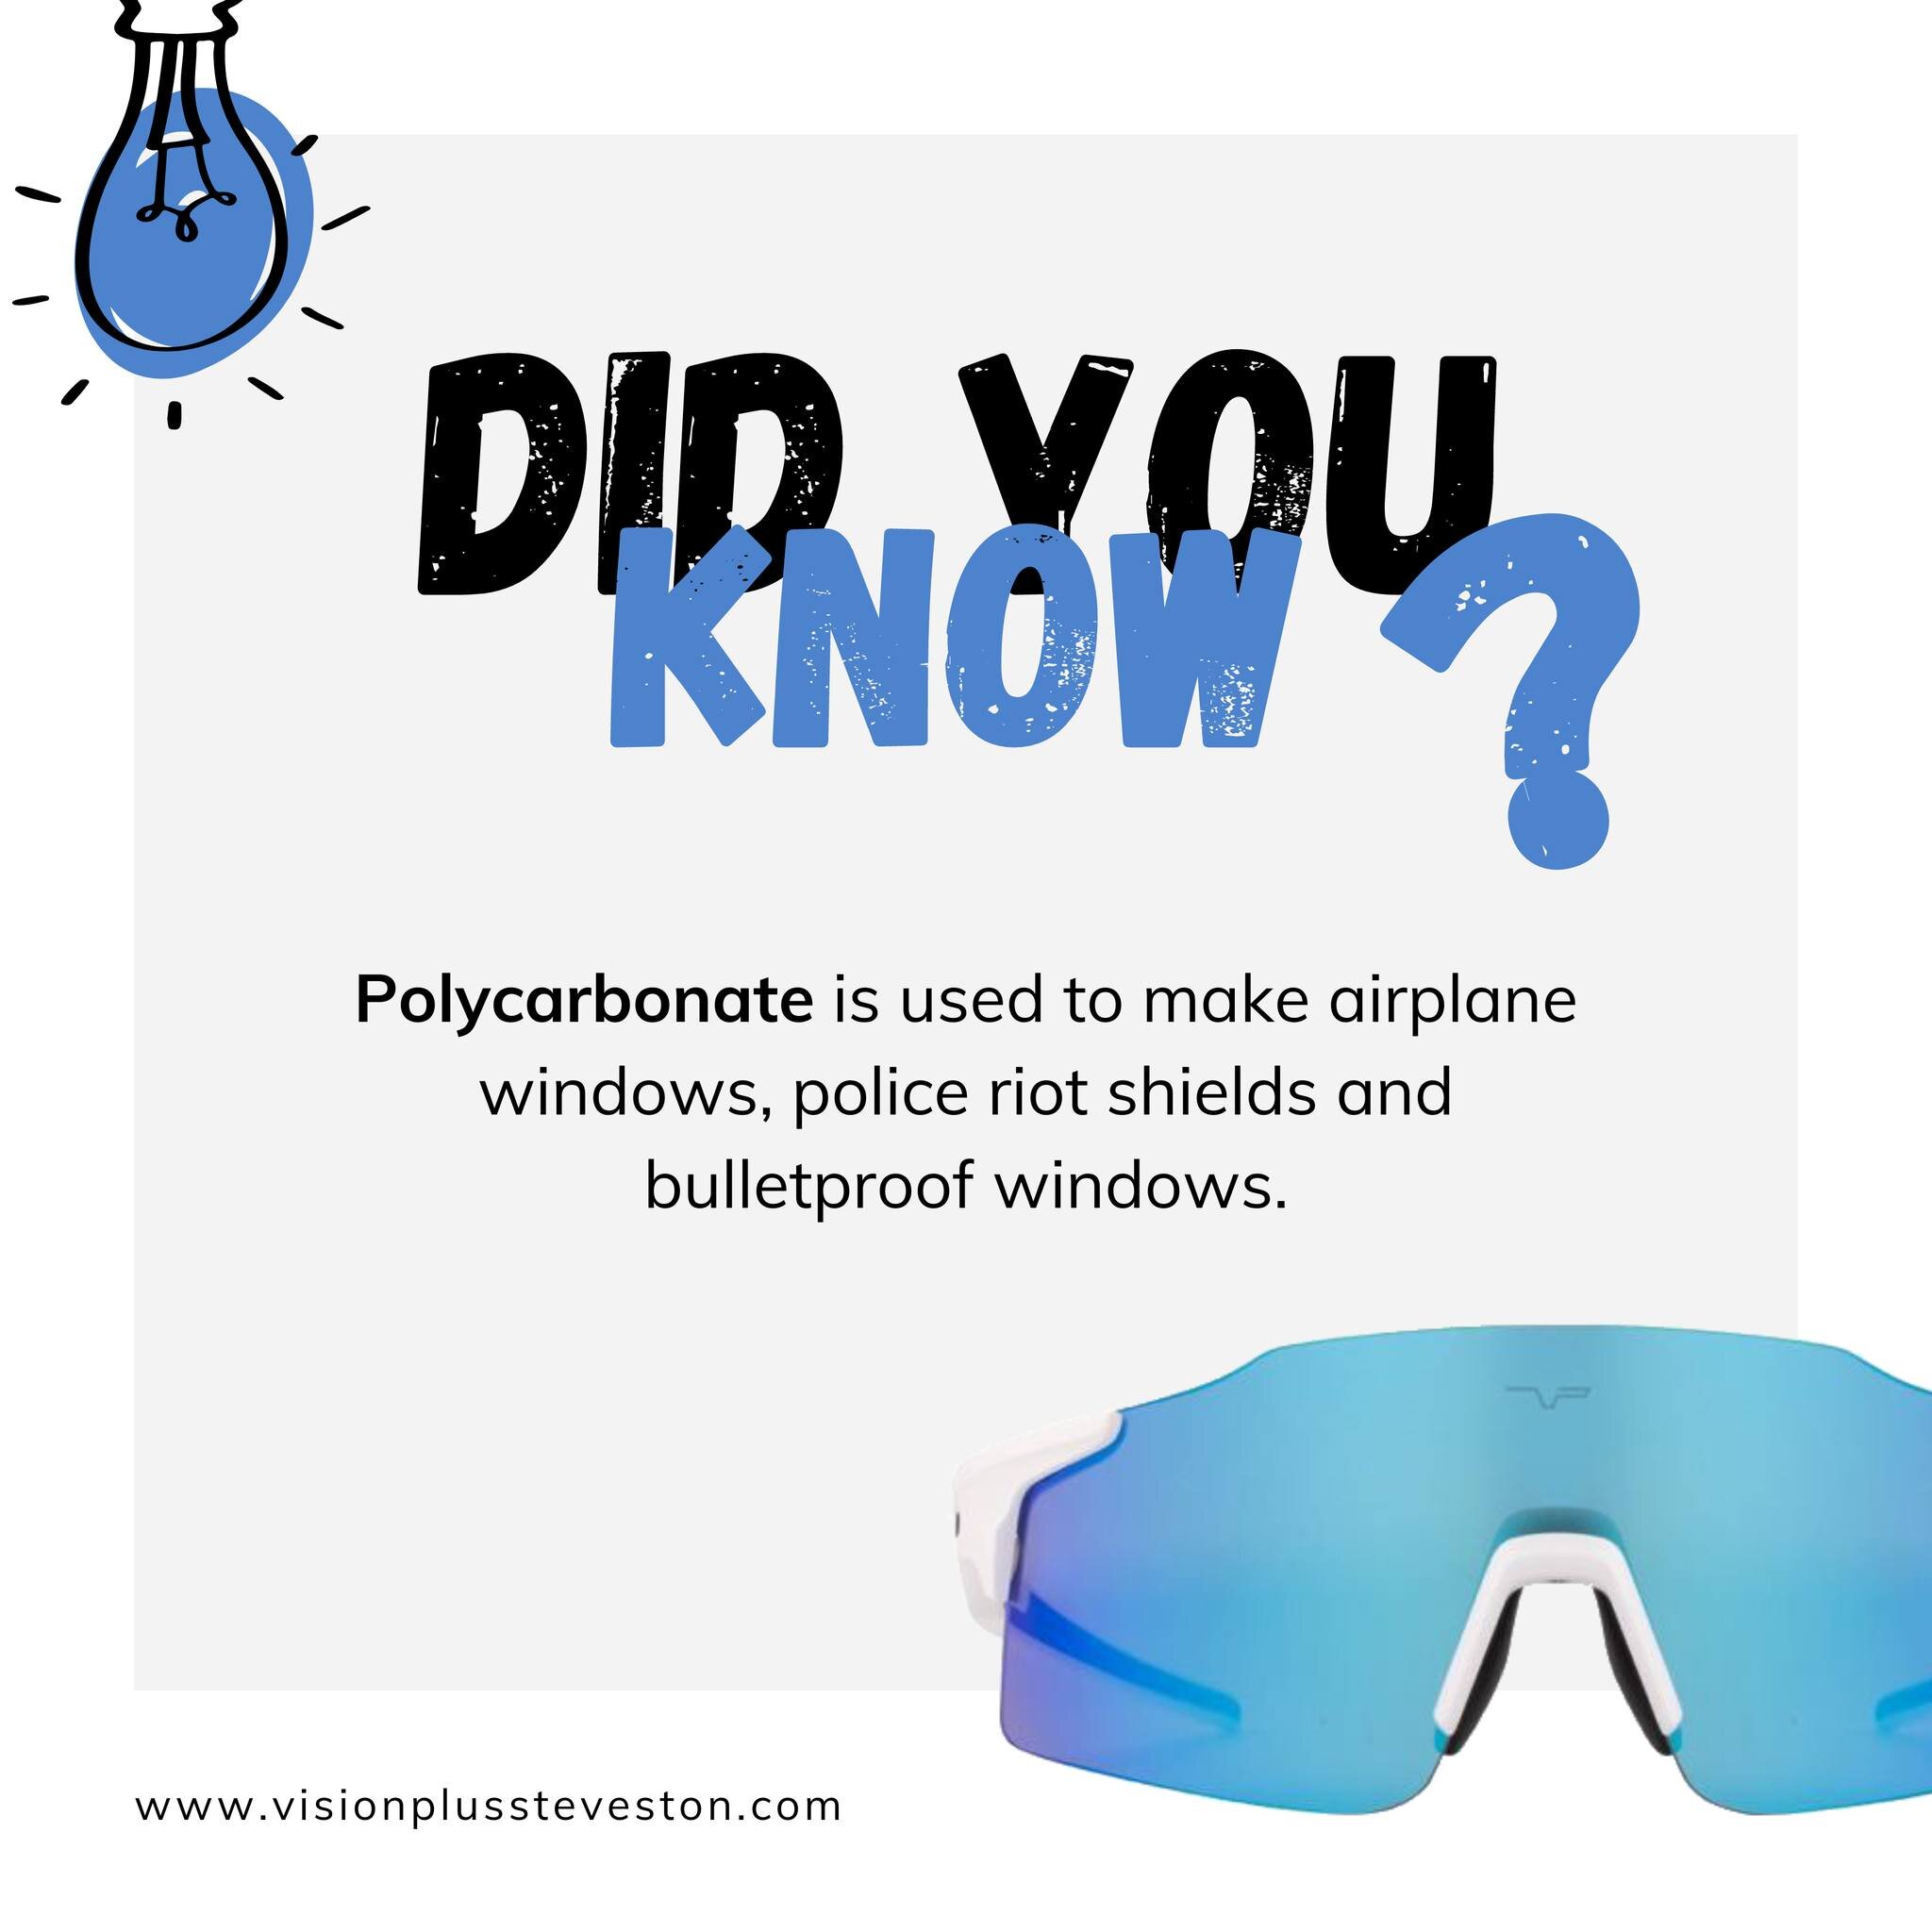 See our protective eyewear collections made with tough polycarbonate!  Get your eyes examined with Vision Plus today!

604.274.2020 
reception@vpsteveston.com

#eyegoggles #WorkplaceEyesWellnessMonth #safetygoggles  #EyeSafety #eyecare #optometry #co